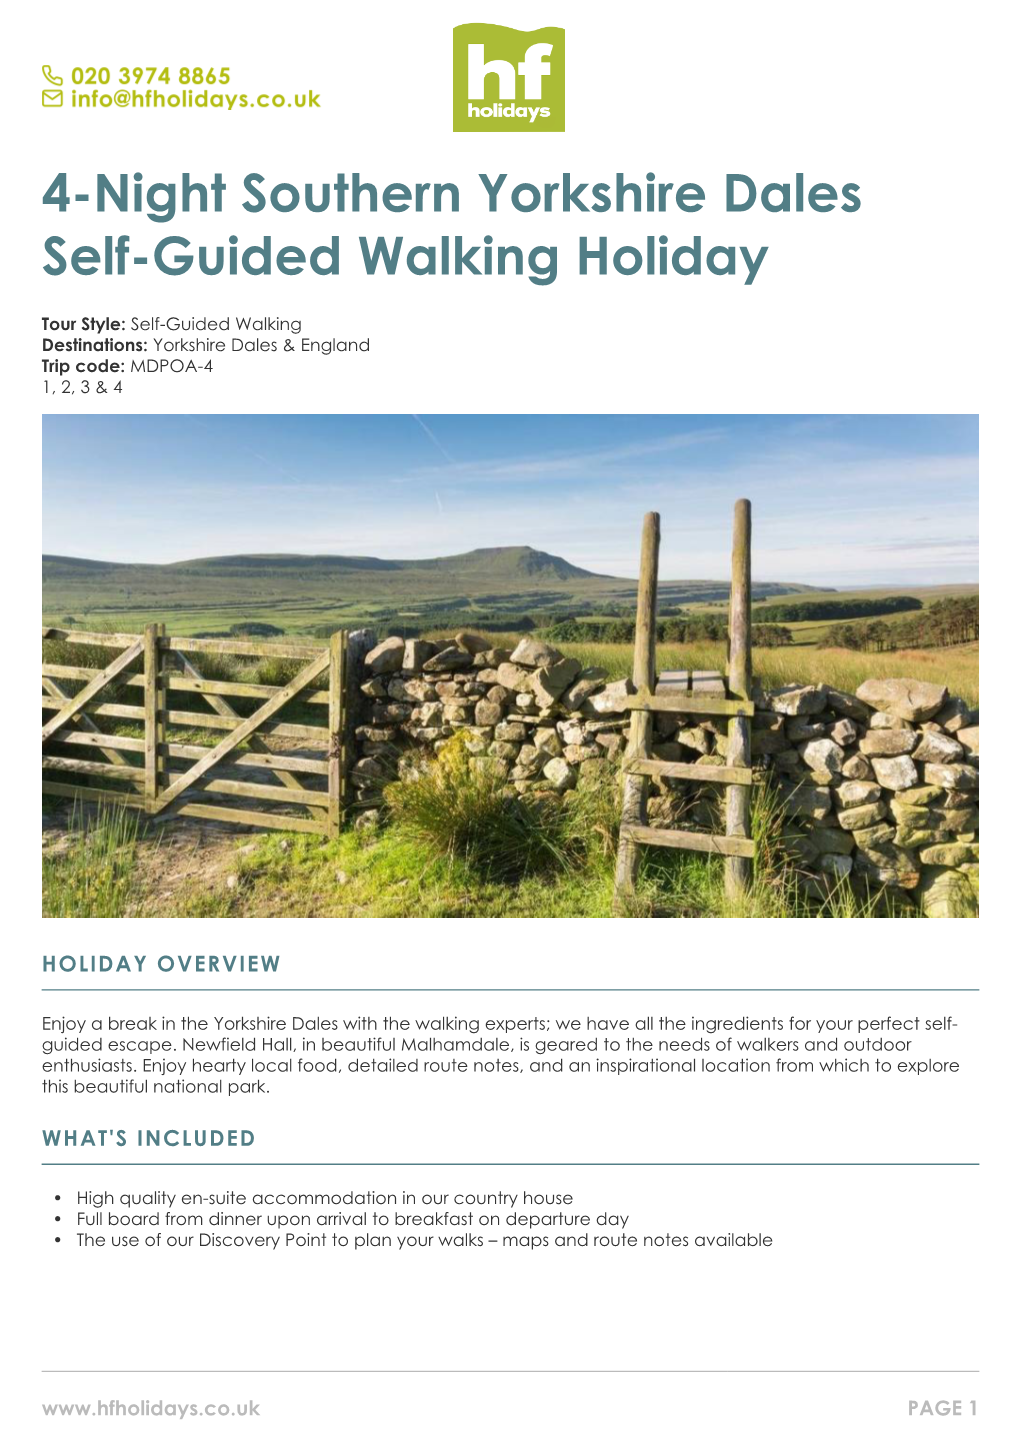 4-Night Southern Yorkshire Dales Self-Guided Walking Holiday